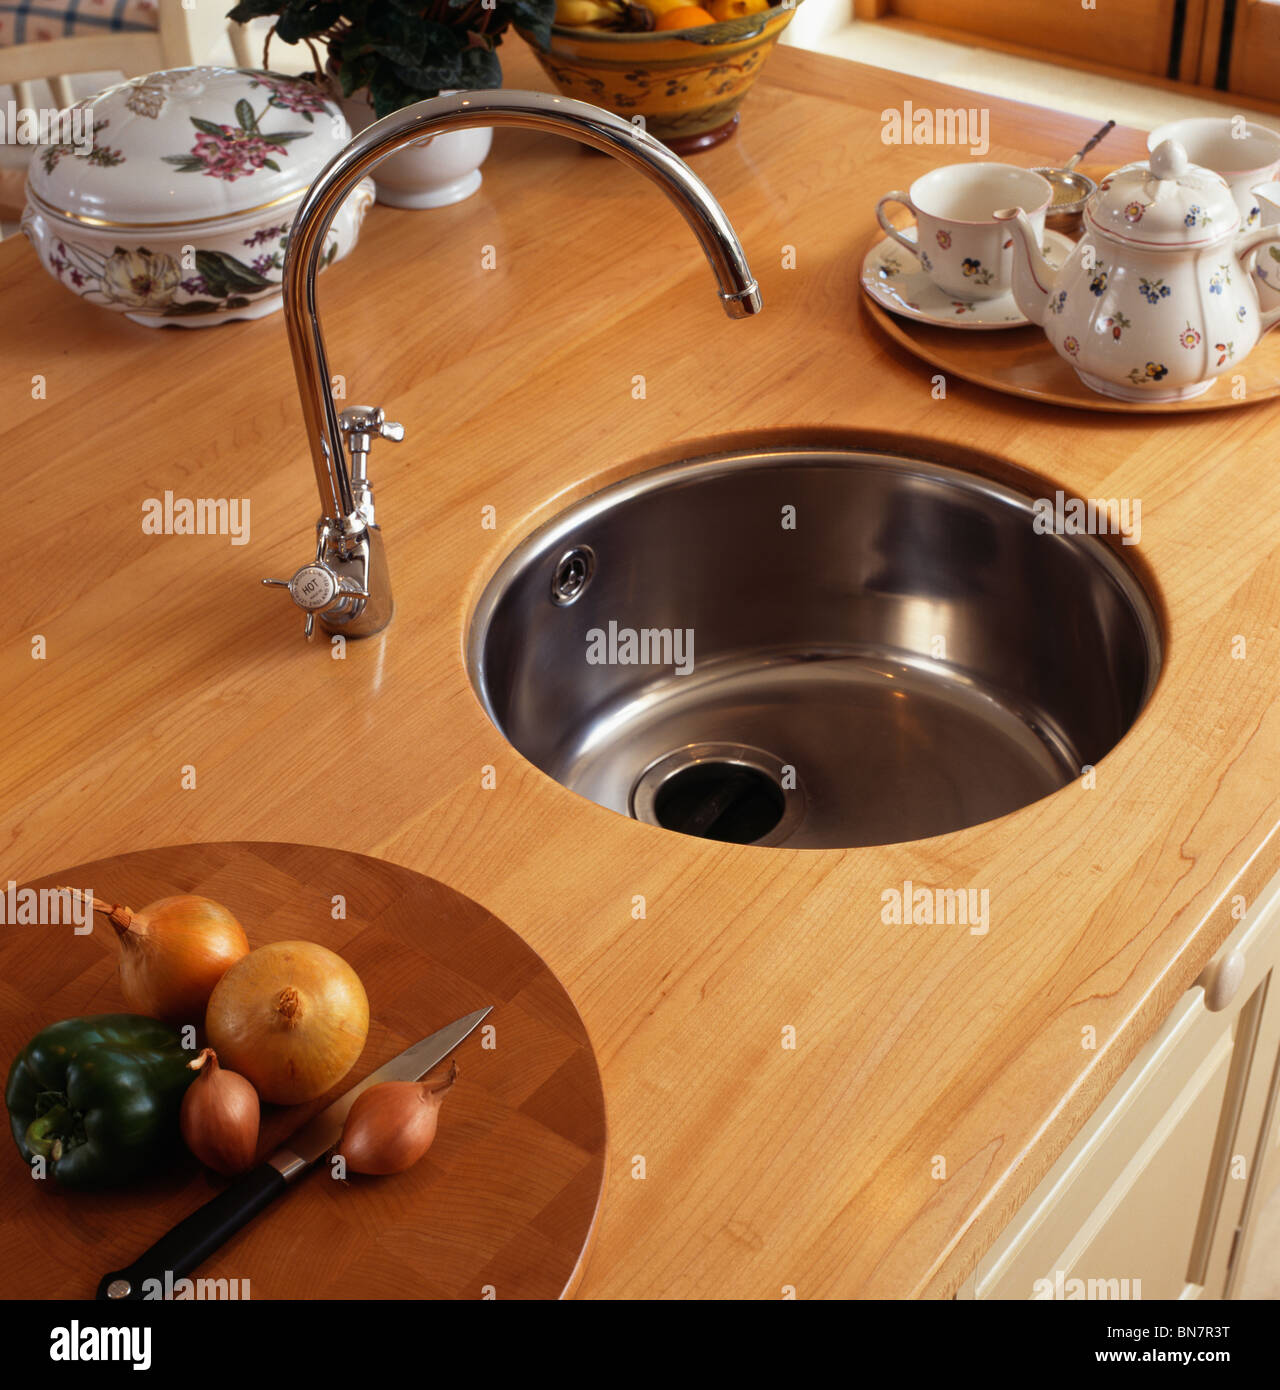 Close-up of circular stainless- steel under-set basin and mixer tap in wood worktop Stock Photo